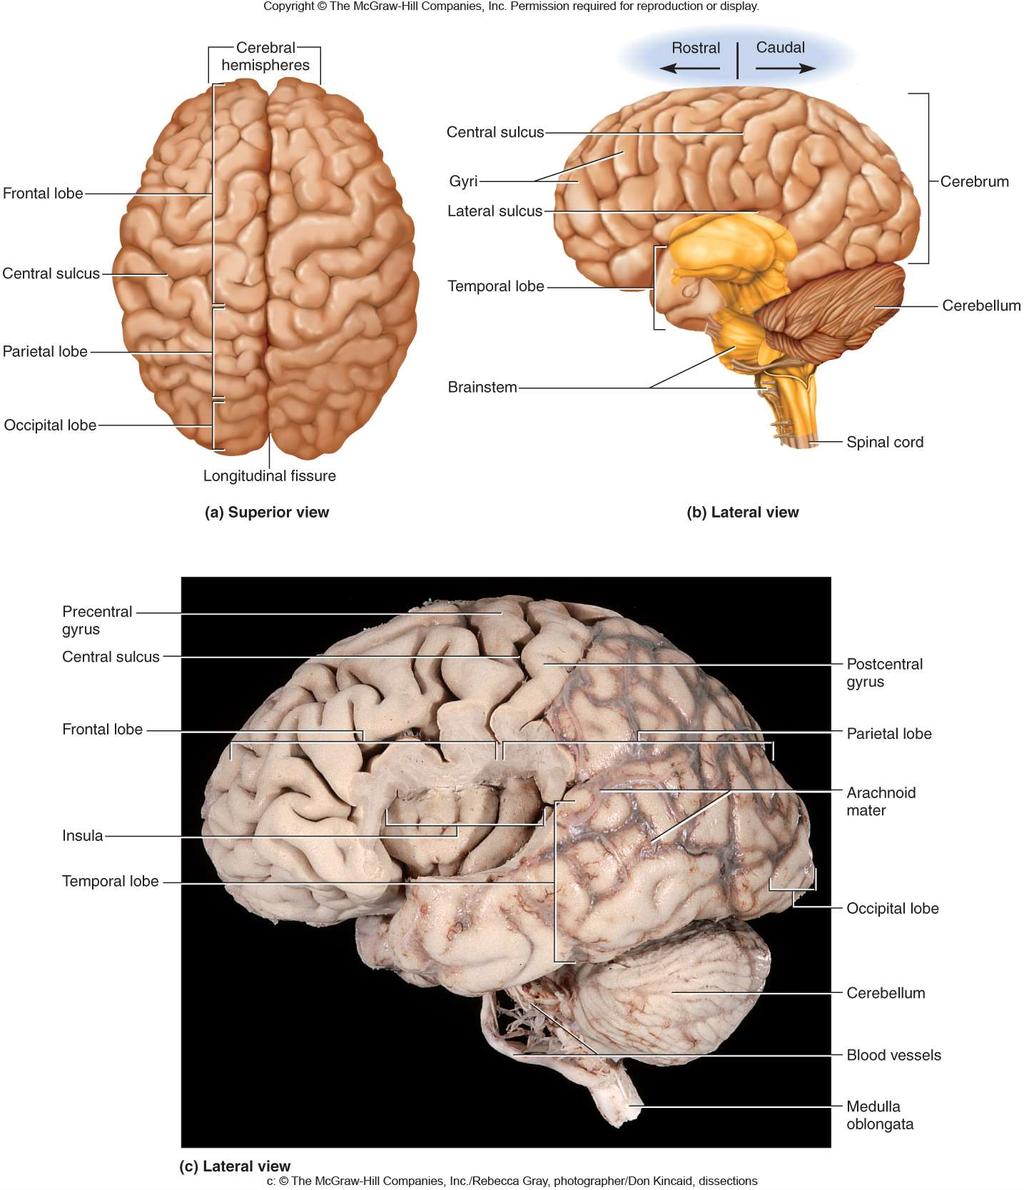 Two Different Methods Can Be Used to Define the Brain Structure Forebrain Diencephalon Cerebrum Midbrain Hindbrain Brain Stem Pons Midbrain Cerebellum The system